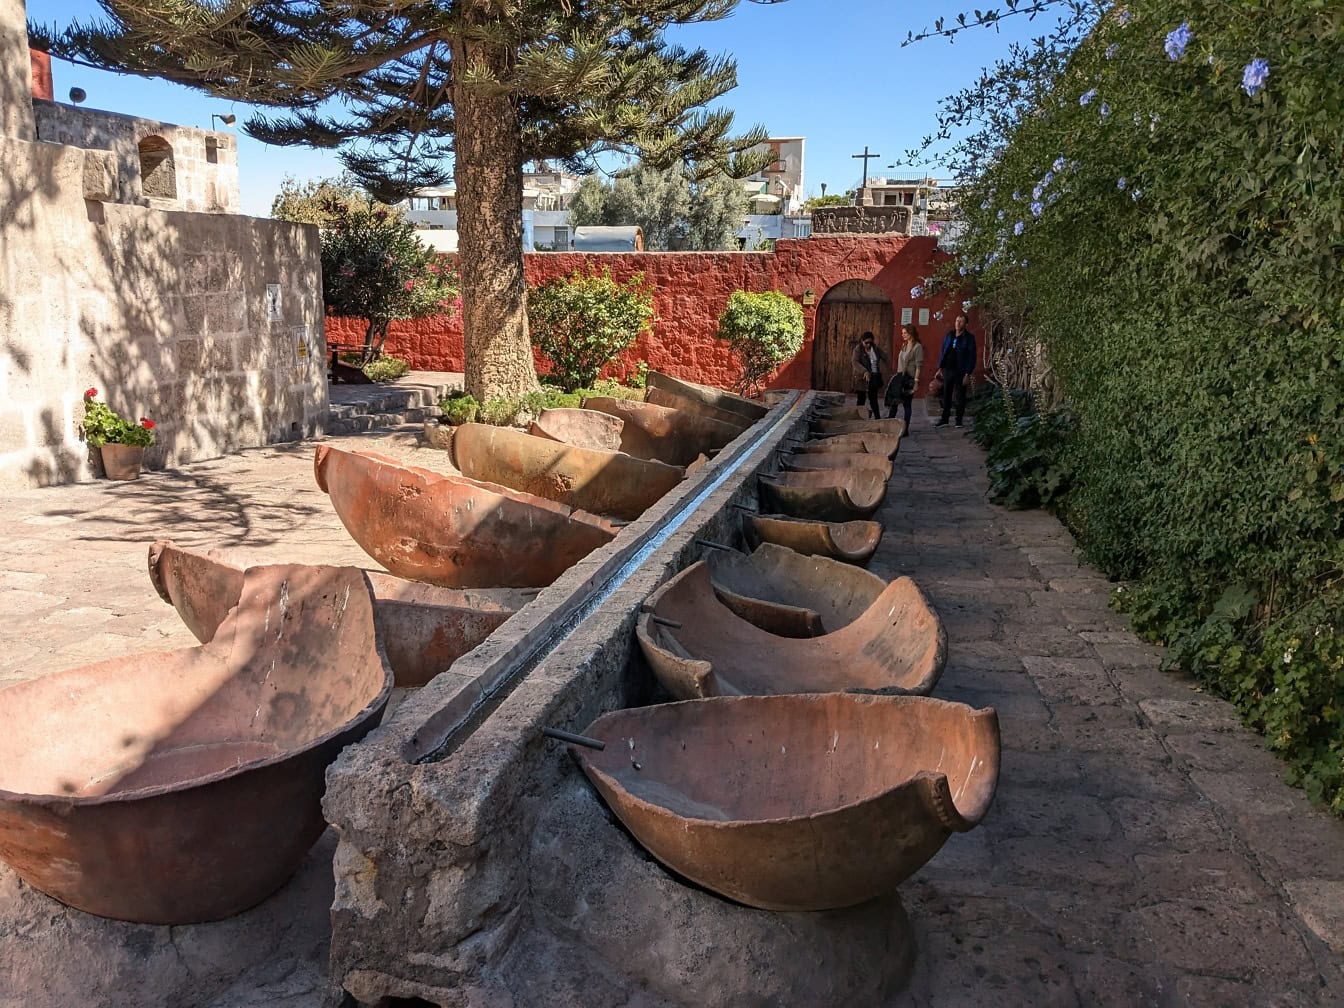 Fountain with large bowls on stone blocks in the garden of the Monastery of Santa Catalina in Arequipa, Peru